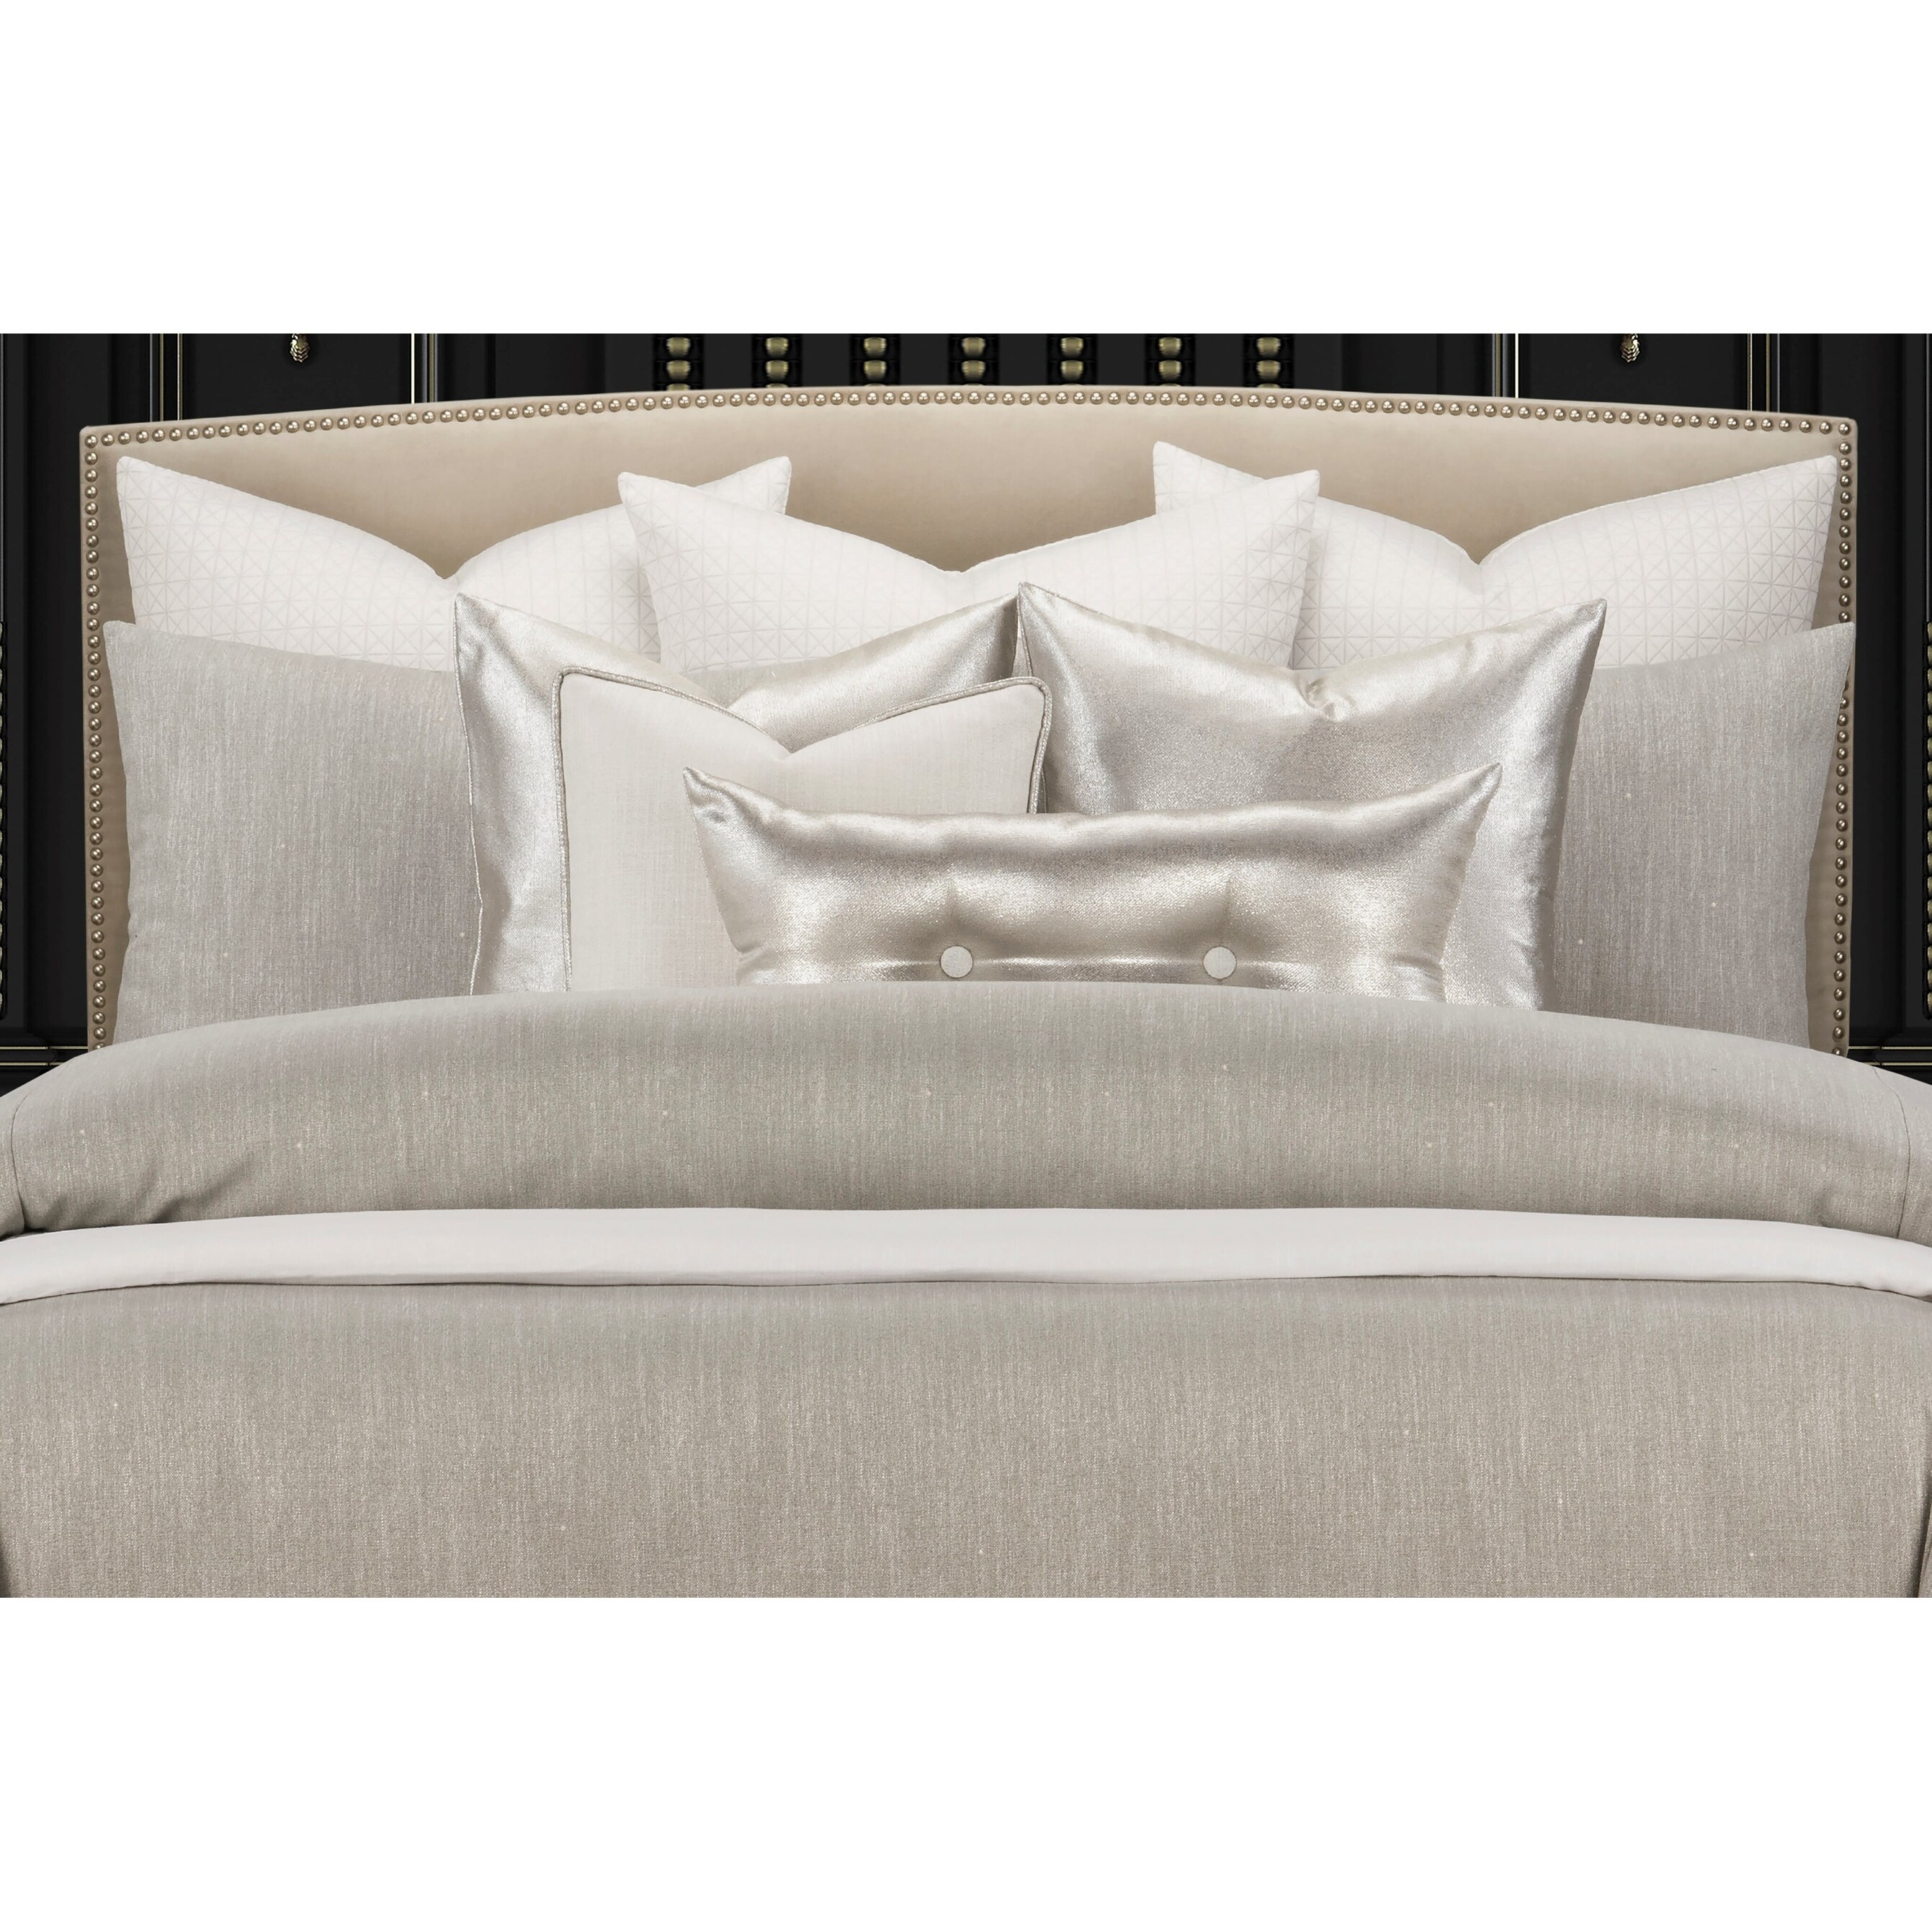 Lumiere Shimmering Supreme Duvet Cover and Insert Set - On Sale